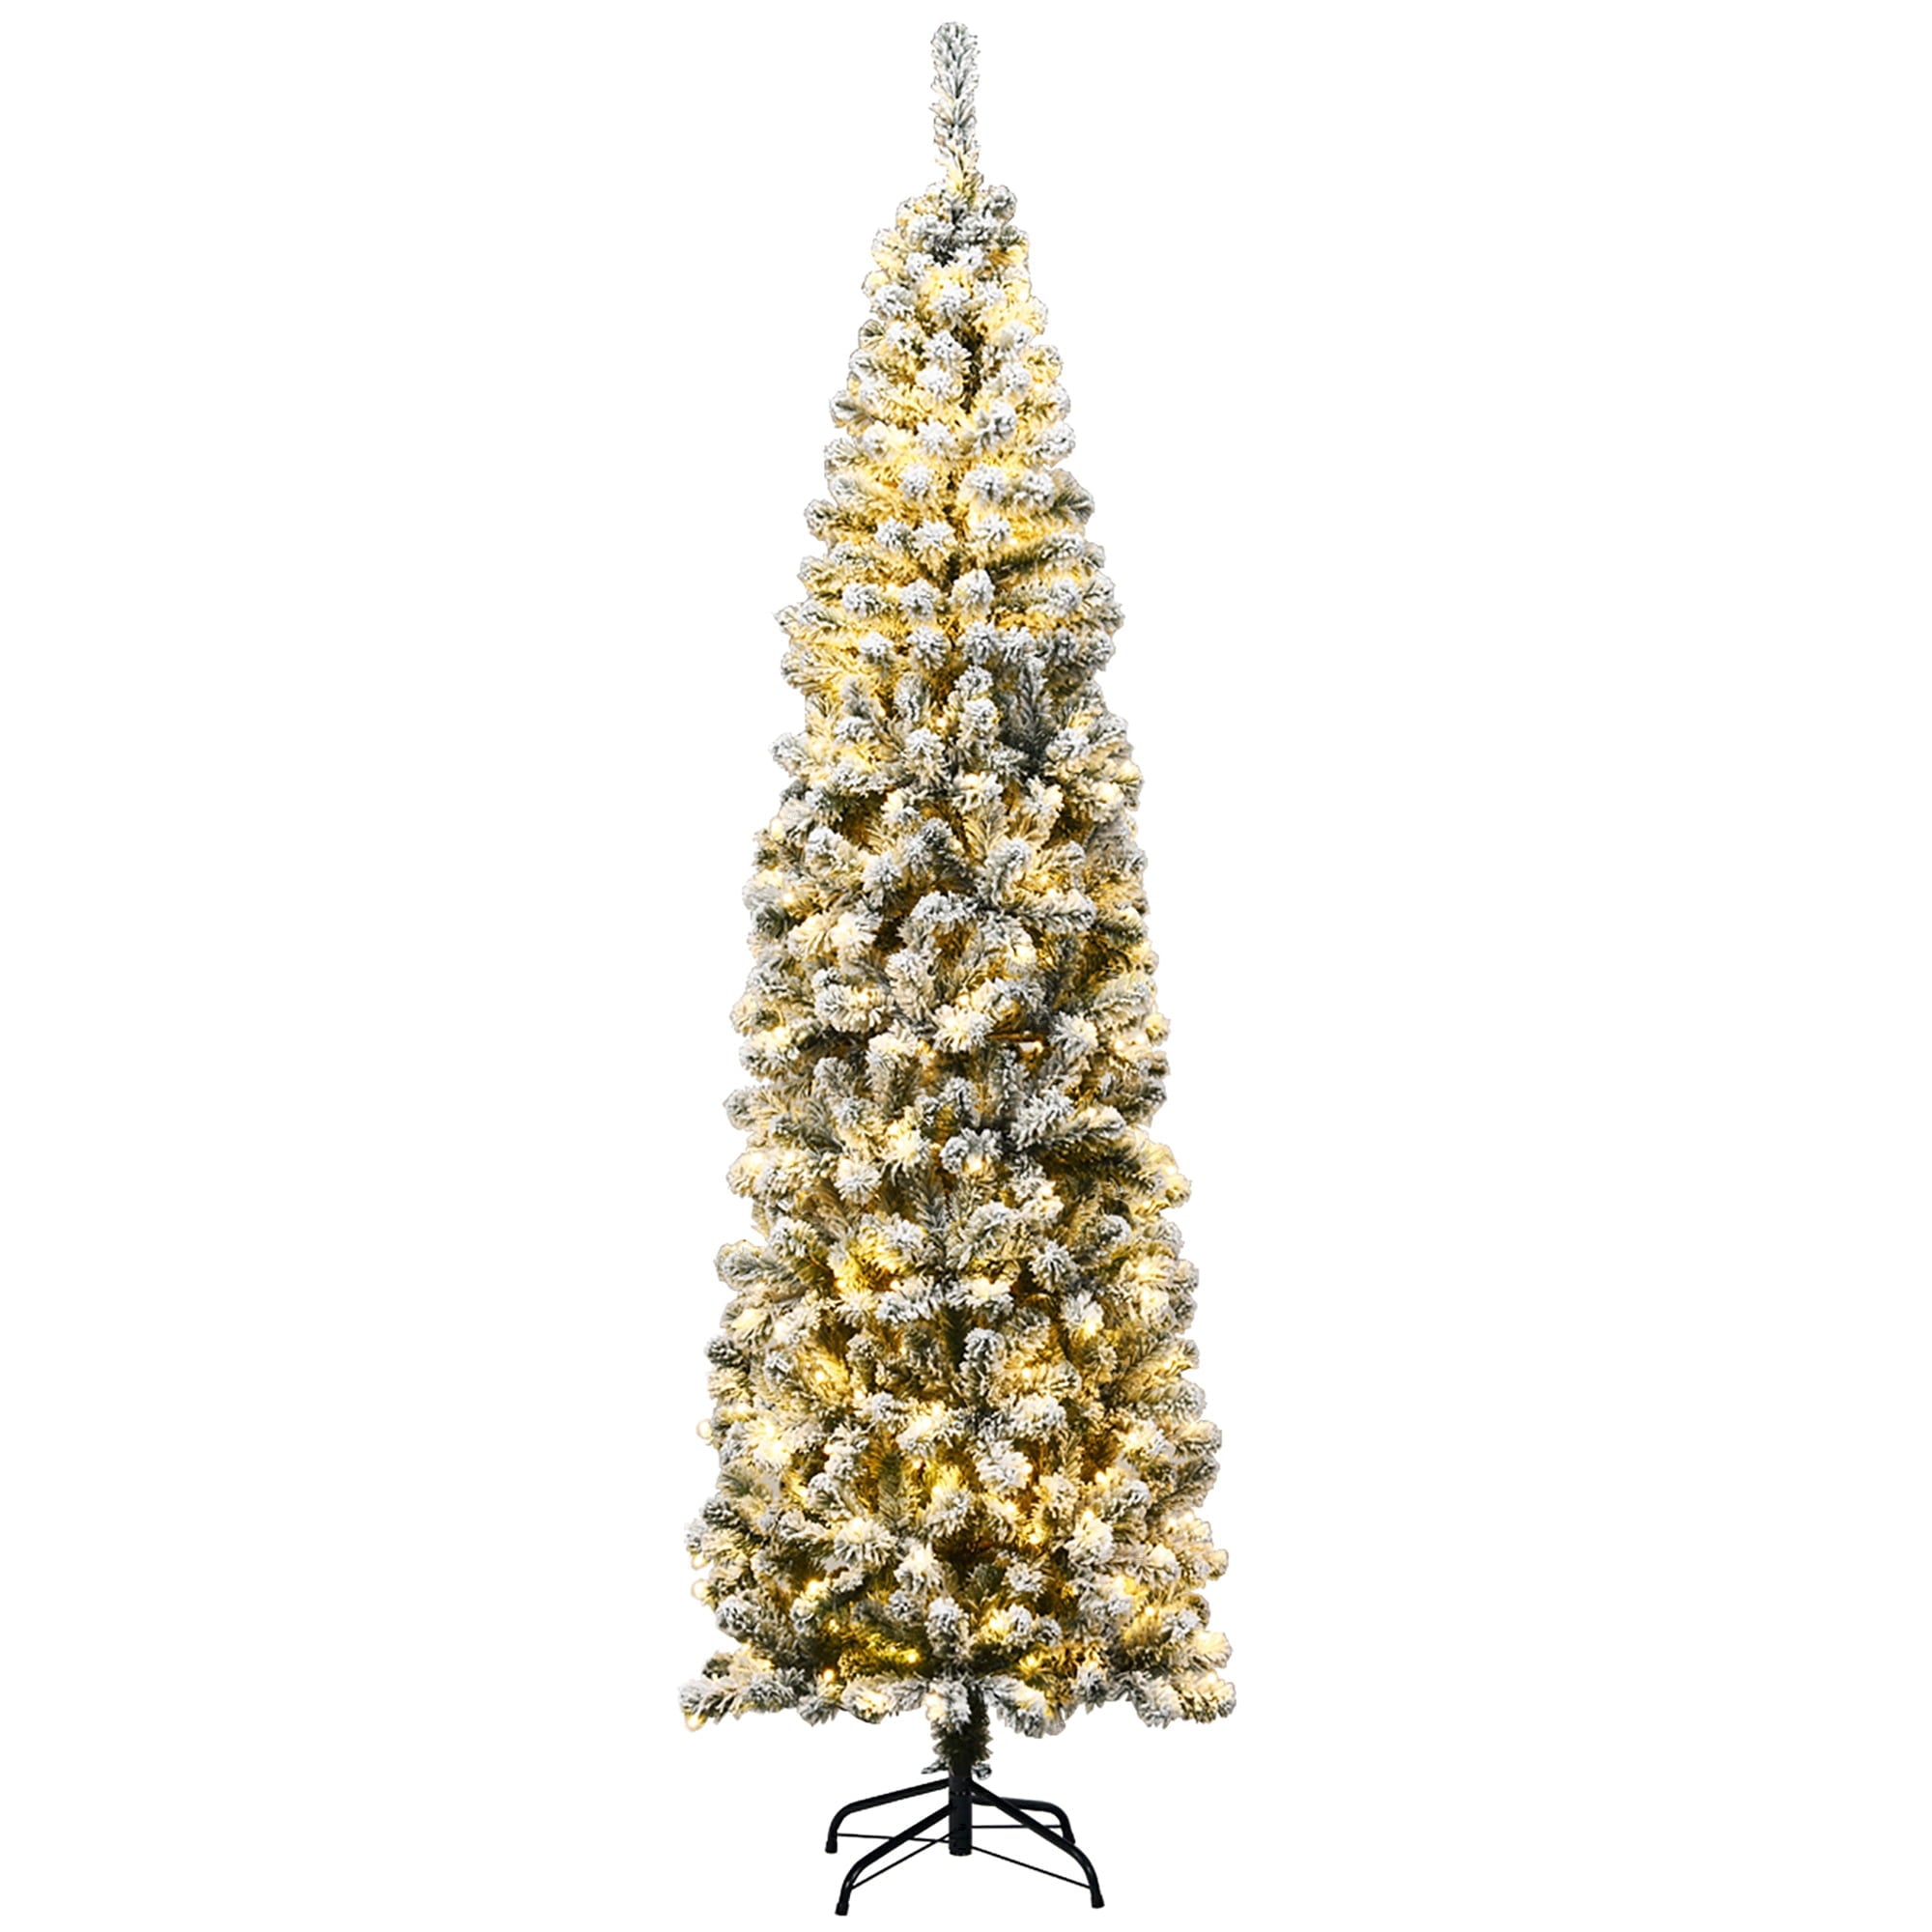 Melliful 7.5Ft Pre-lit Snow Flocked Artificial Pencil Christmas Tree, with 1000 Branch Tips and 200 LED Lights Holiday Home Xmas Decoration，Metal Base Stand,White